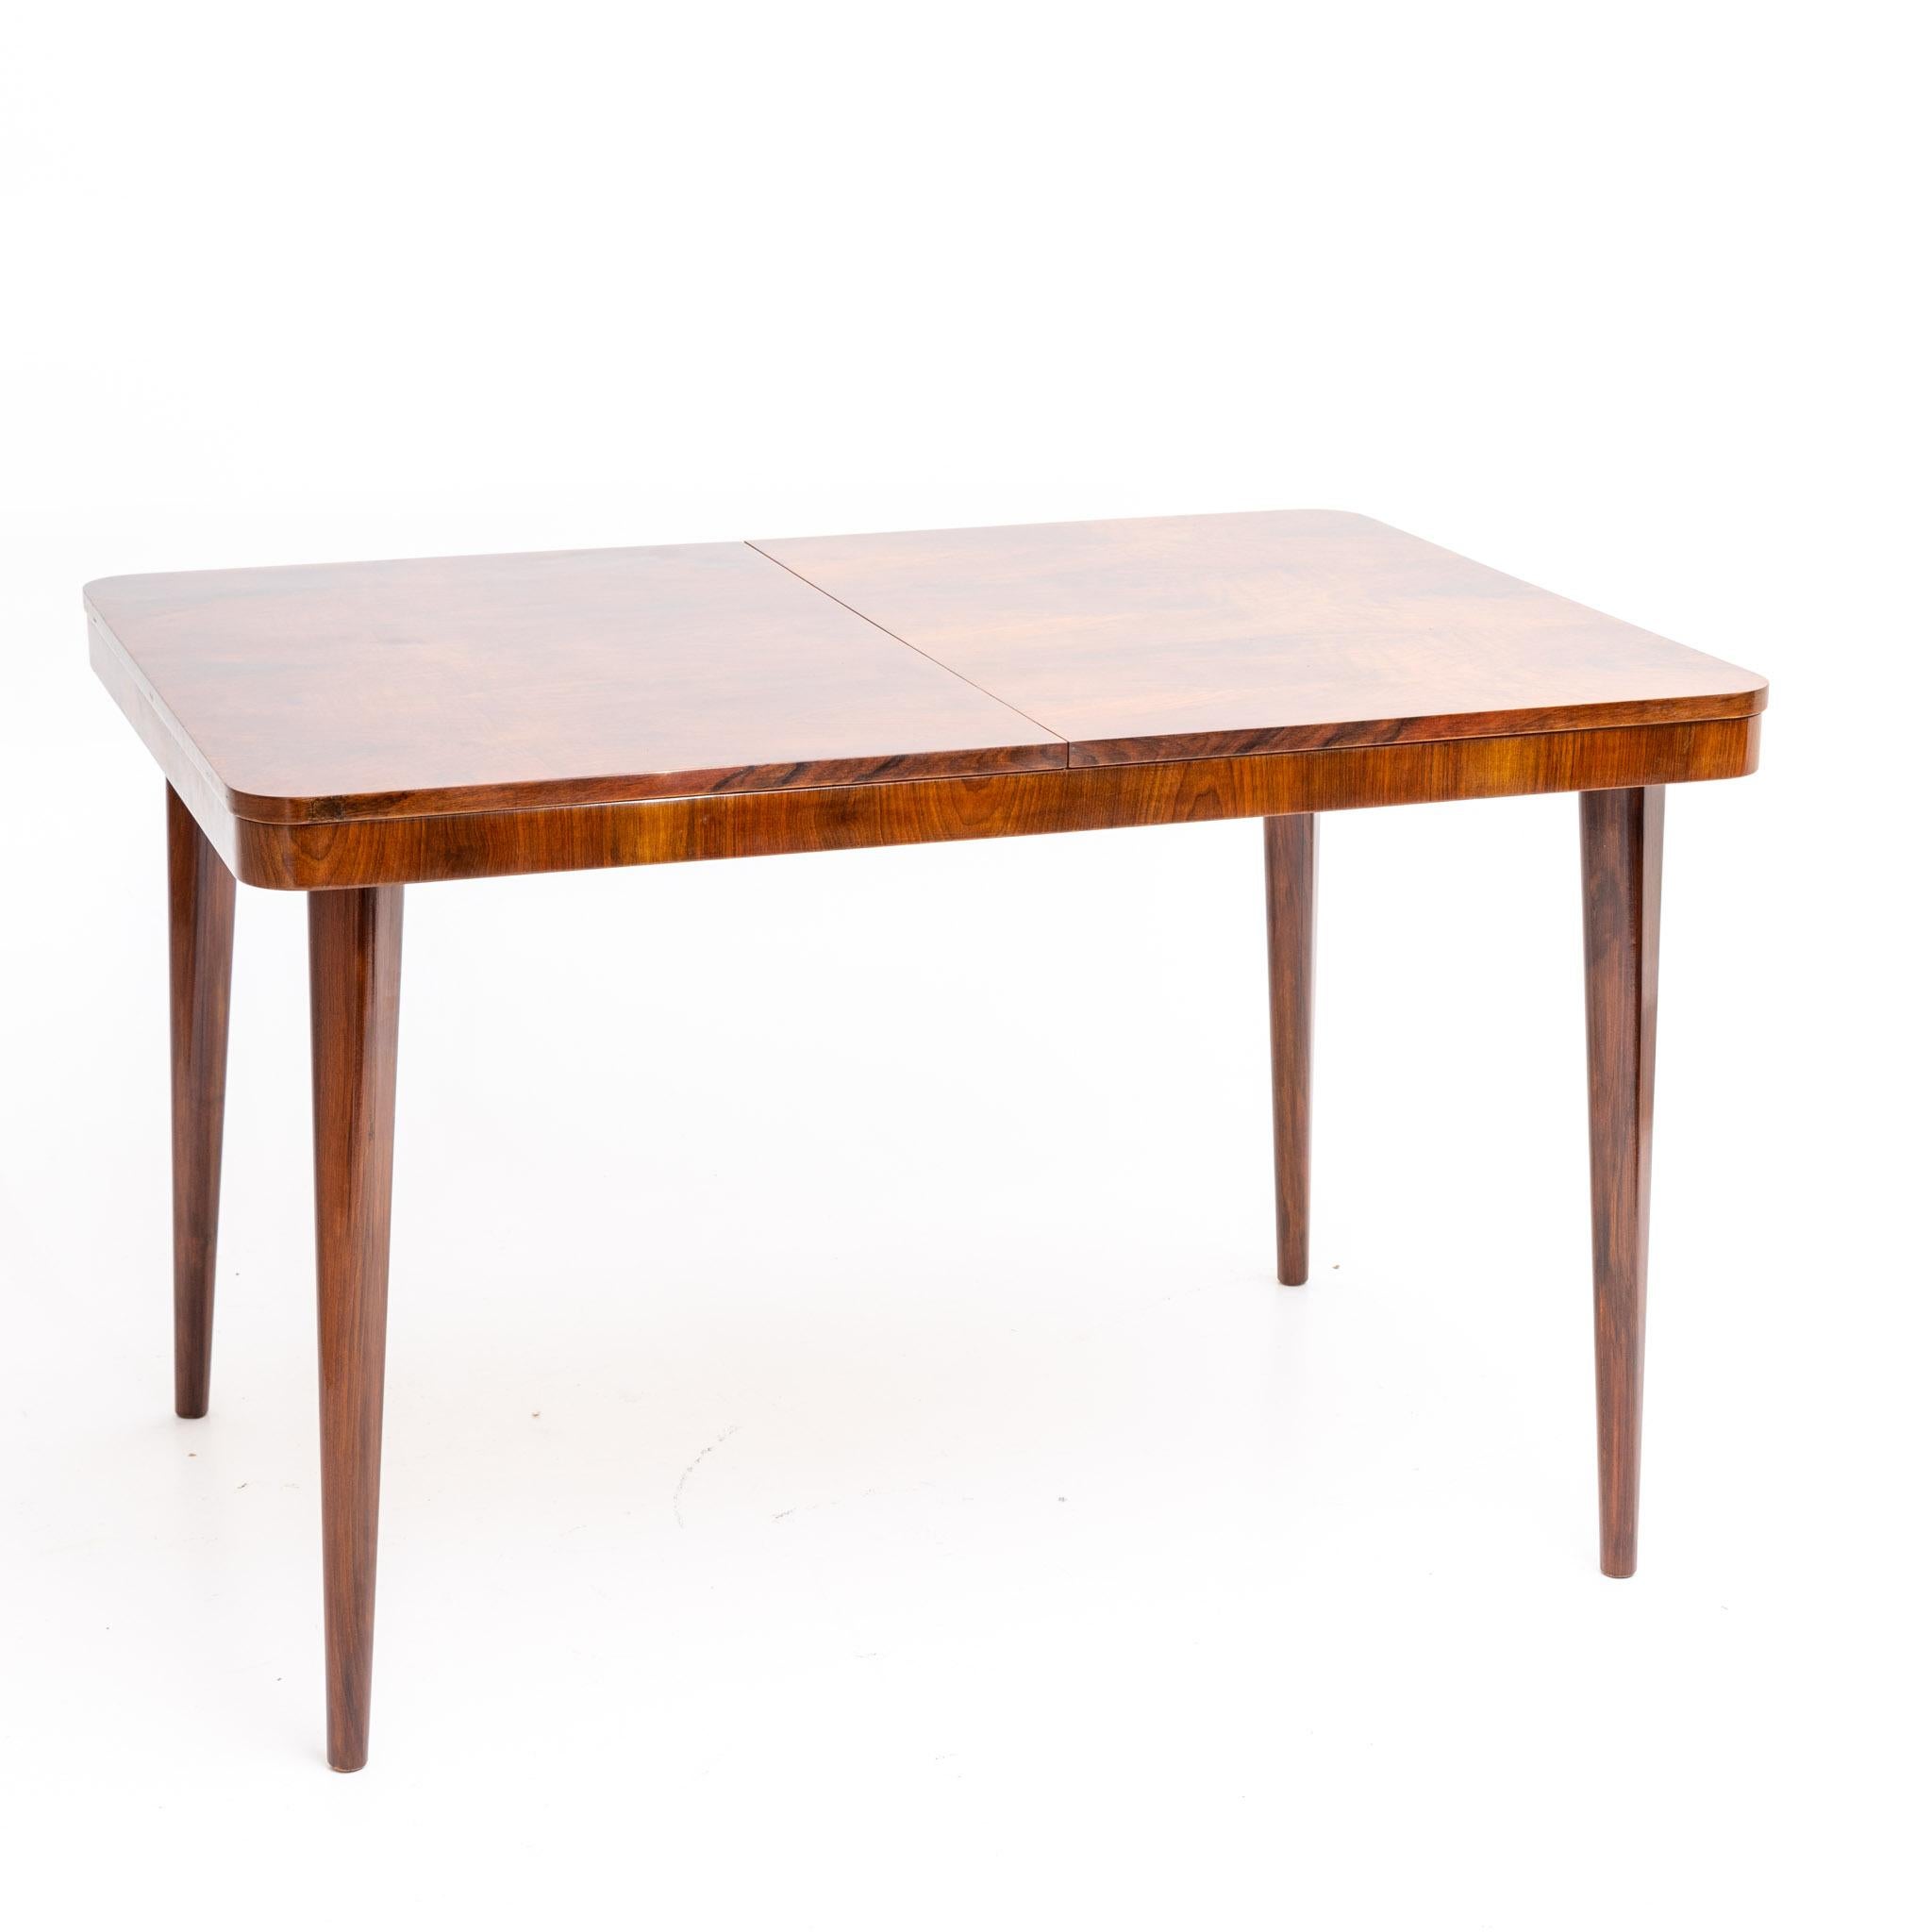 European Extendable Dining Table by Jindrich Halabala for UP Zavody, Czechoslovakia, 1950 For Sale